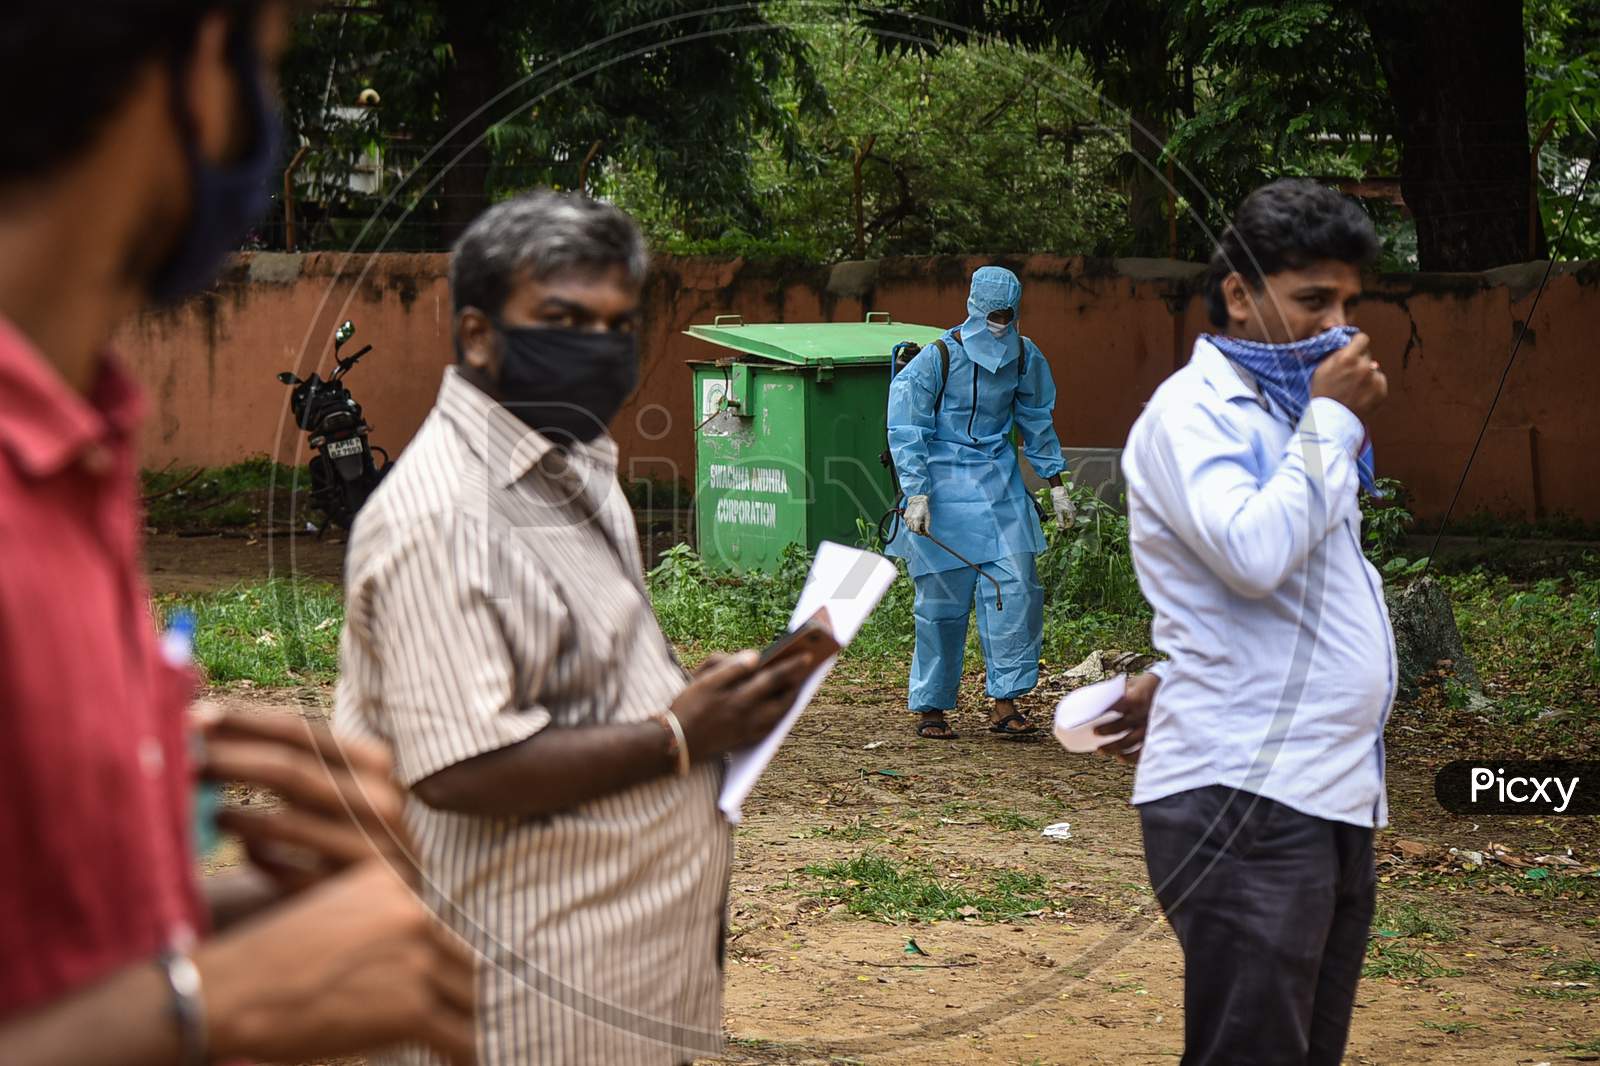 A Sanitary Worker Wearing Ppe Kit Arrives To Disinfect The Area As People Wait For The Covid-19 Test At Igmc Stadium, In Vijayawada, August 03, 2020.